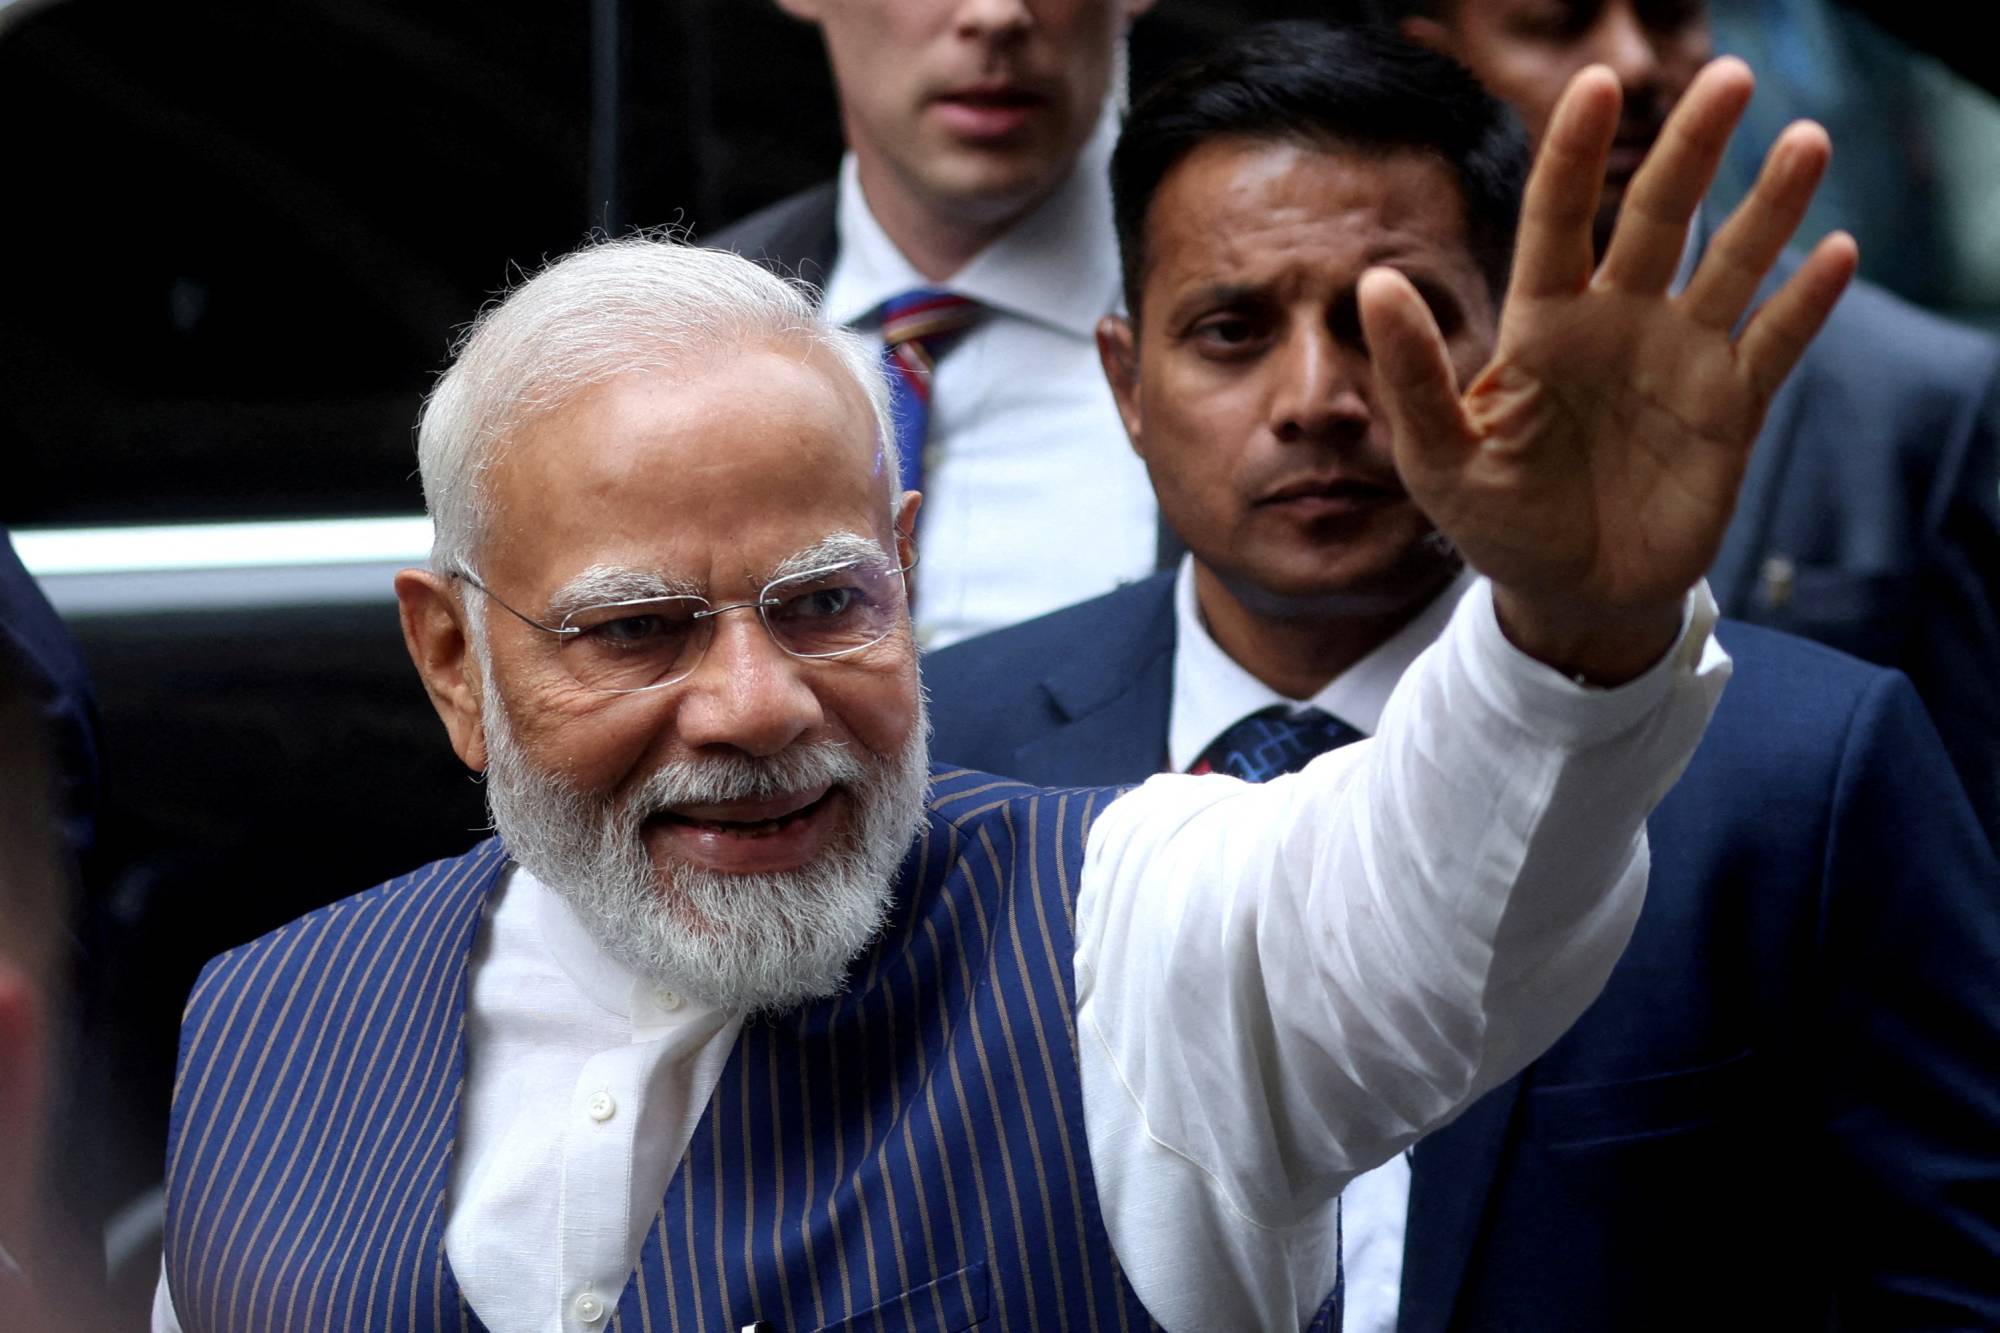 Modi visits U.S. to deepen ties, saying there's no doubting India's